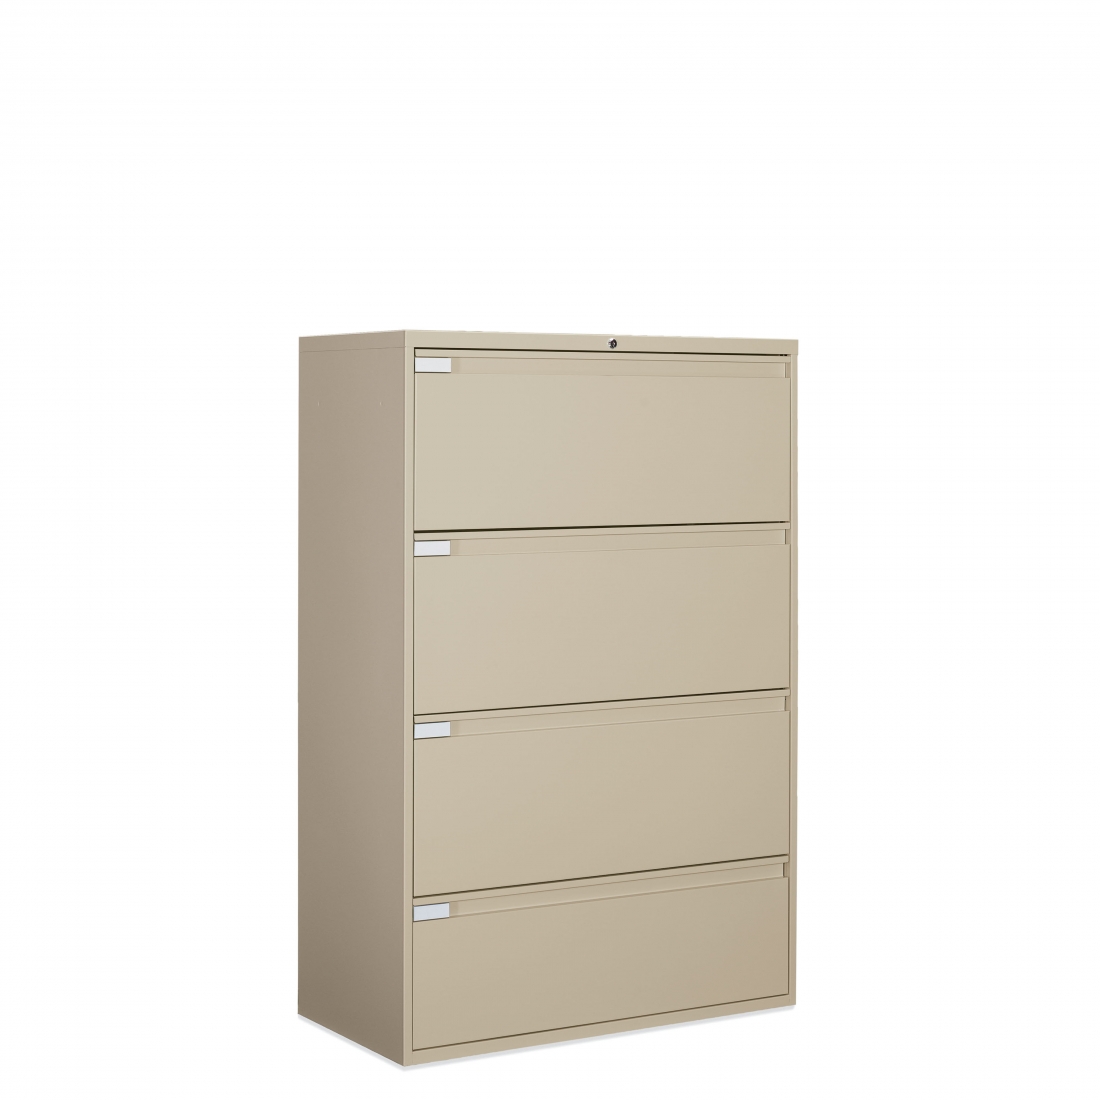 36"W 4 Drawer Lateral File